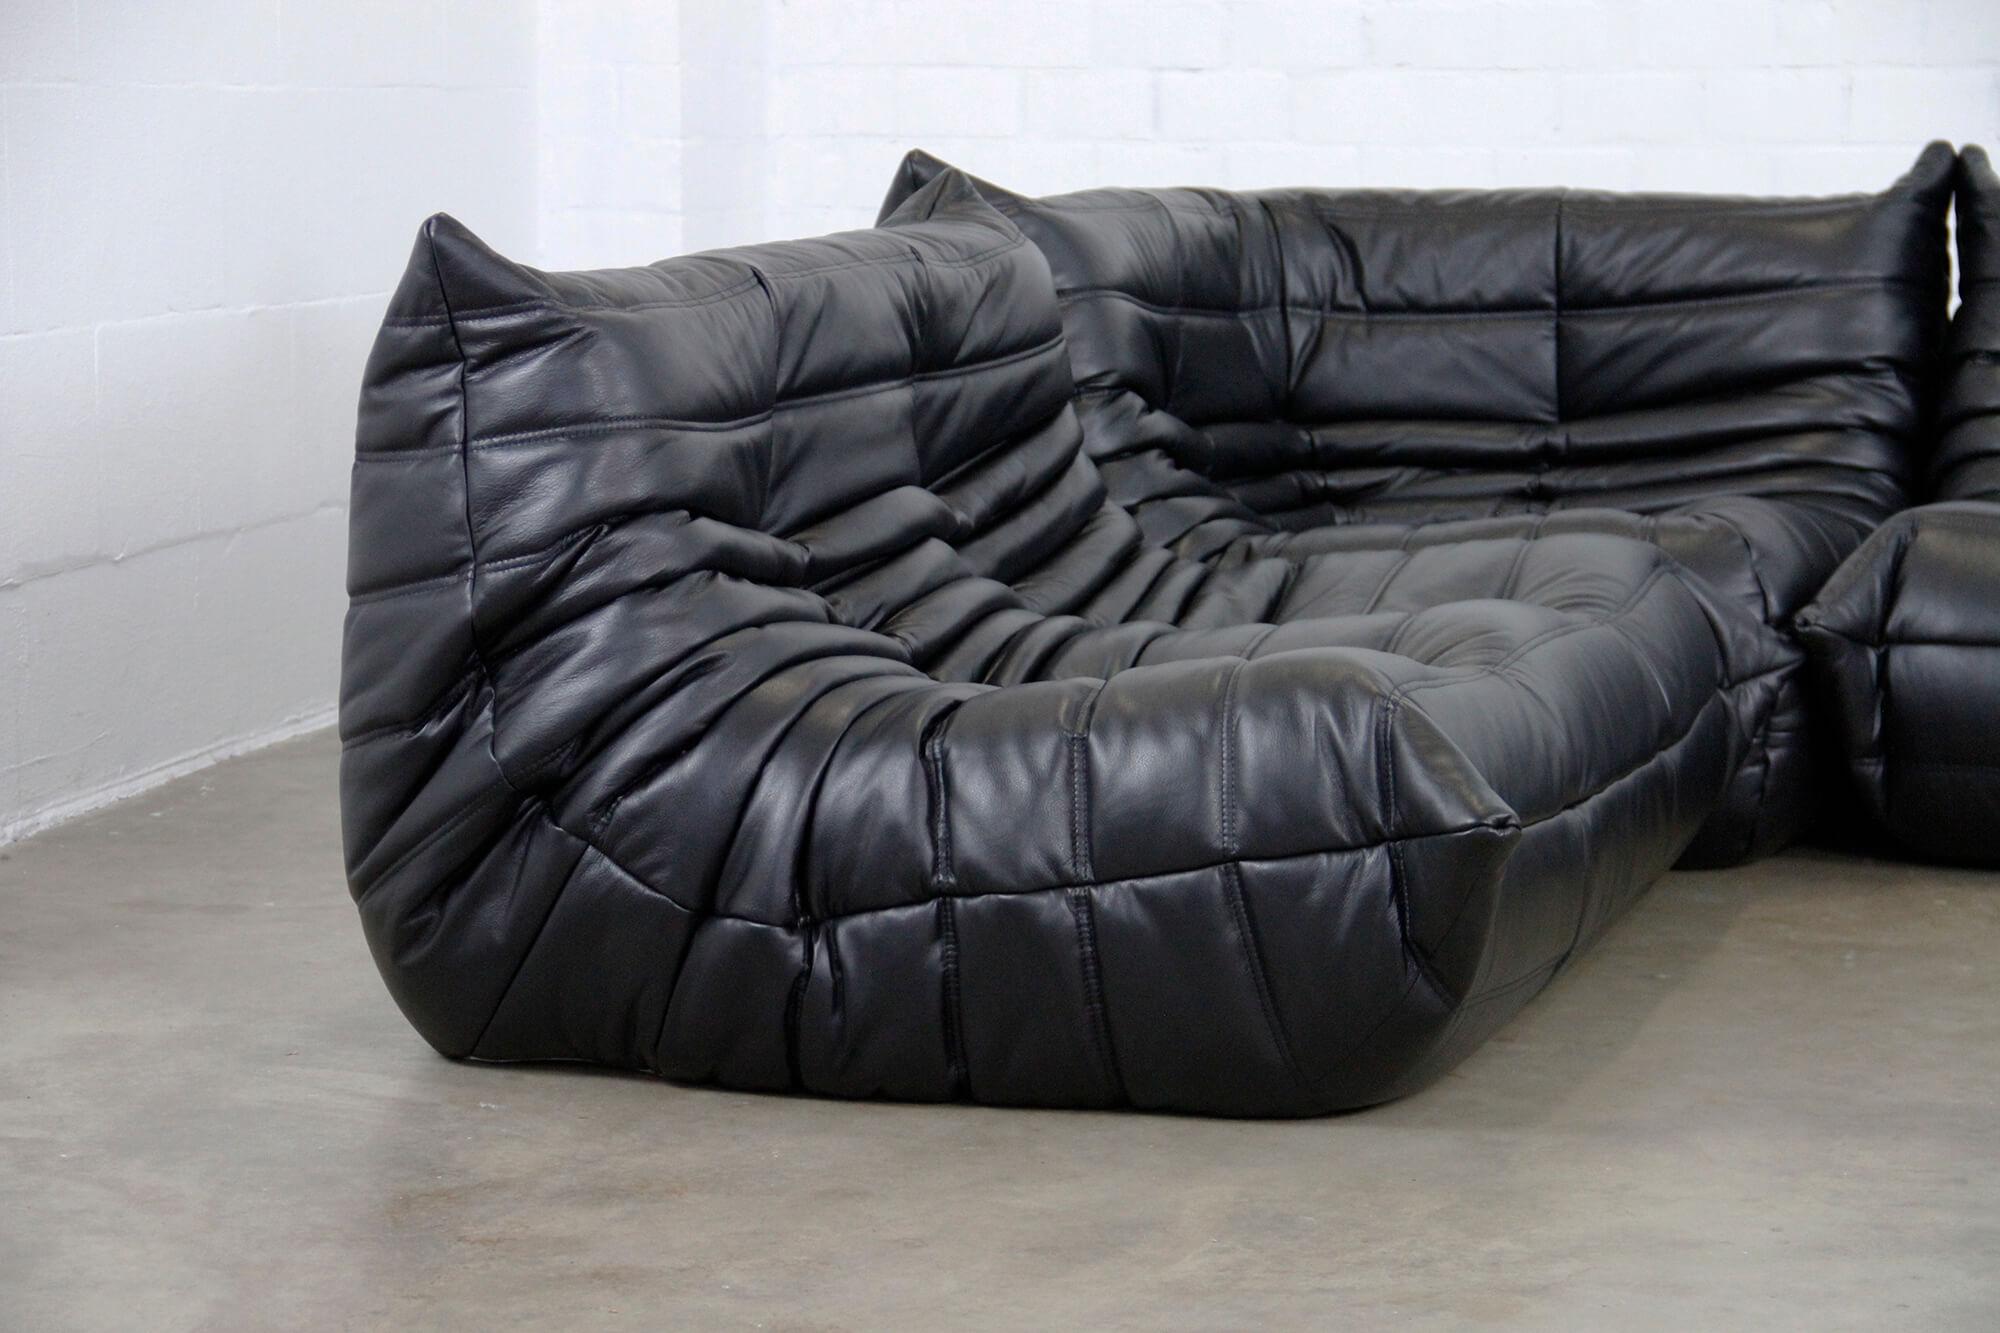 French seating designer Michel Ducaroy (1925-2009) is best known for his iconic, pop art-inspired Togo sofa.
This piece is reupholstered in a soft black leather.
 